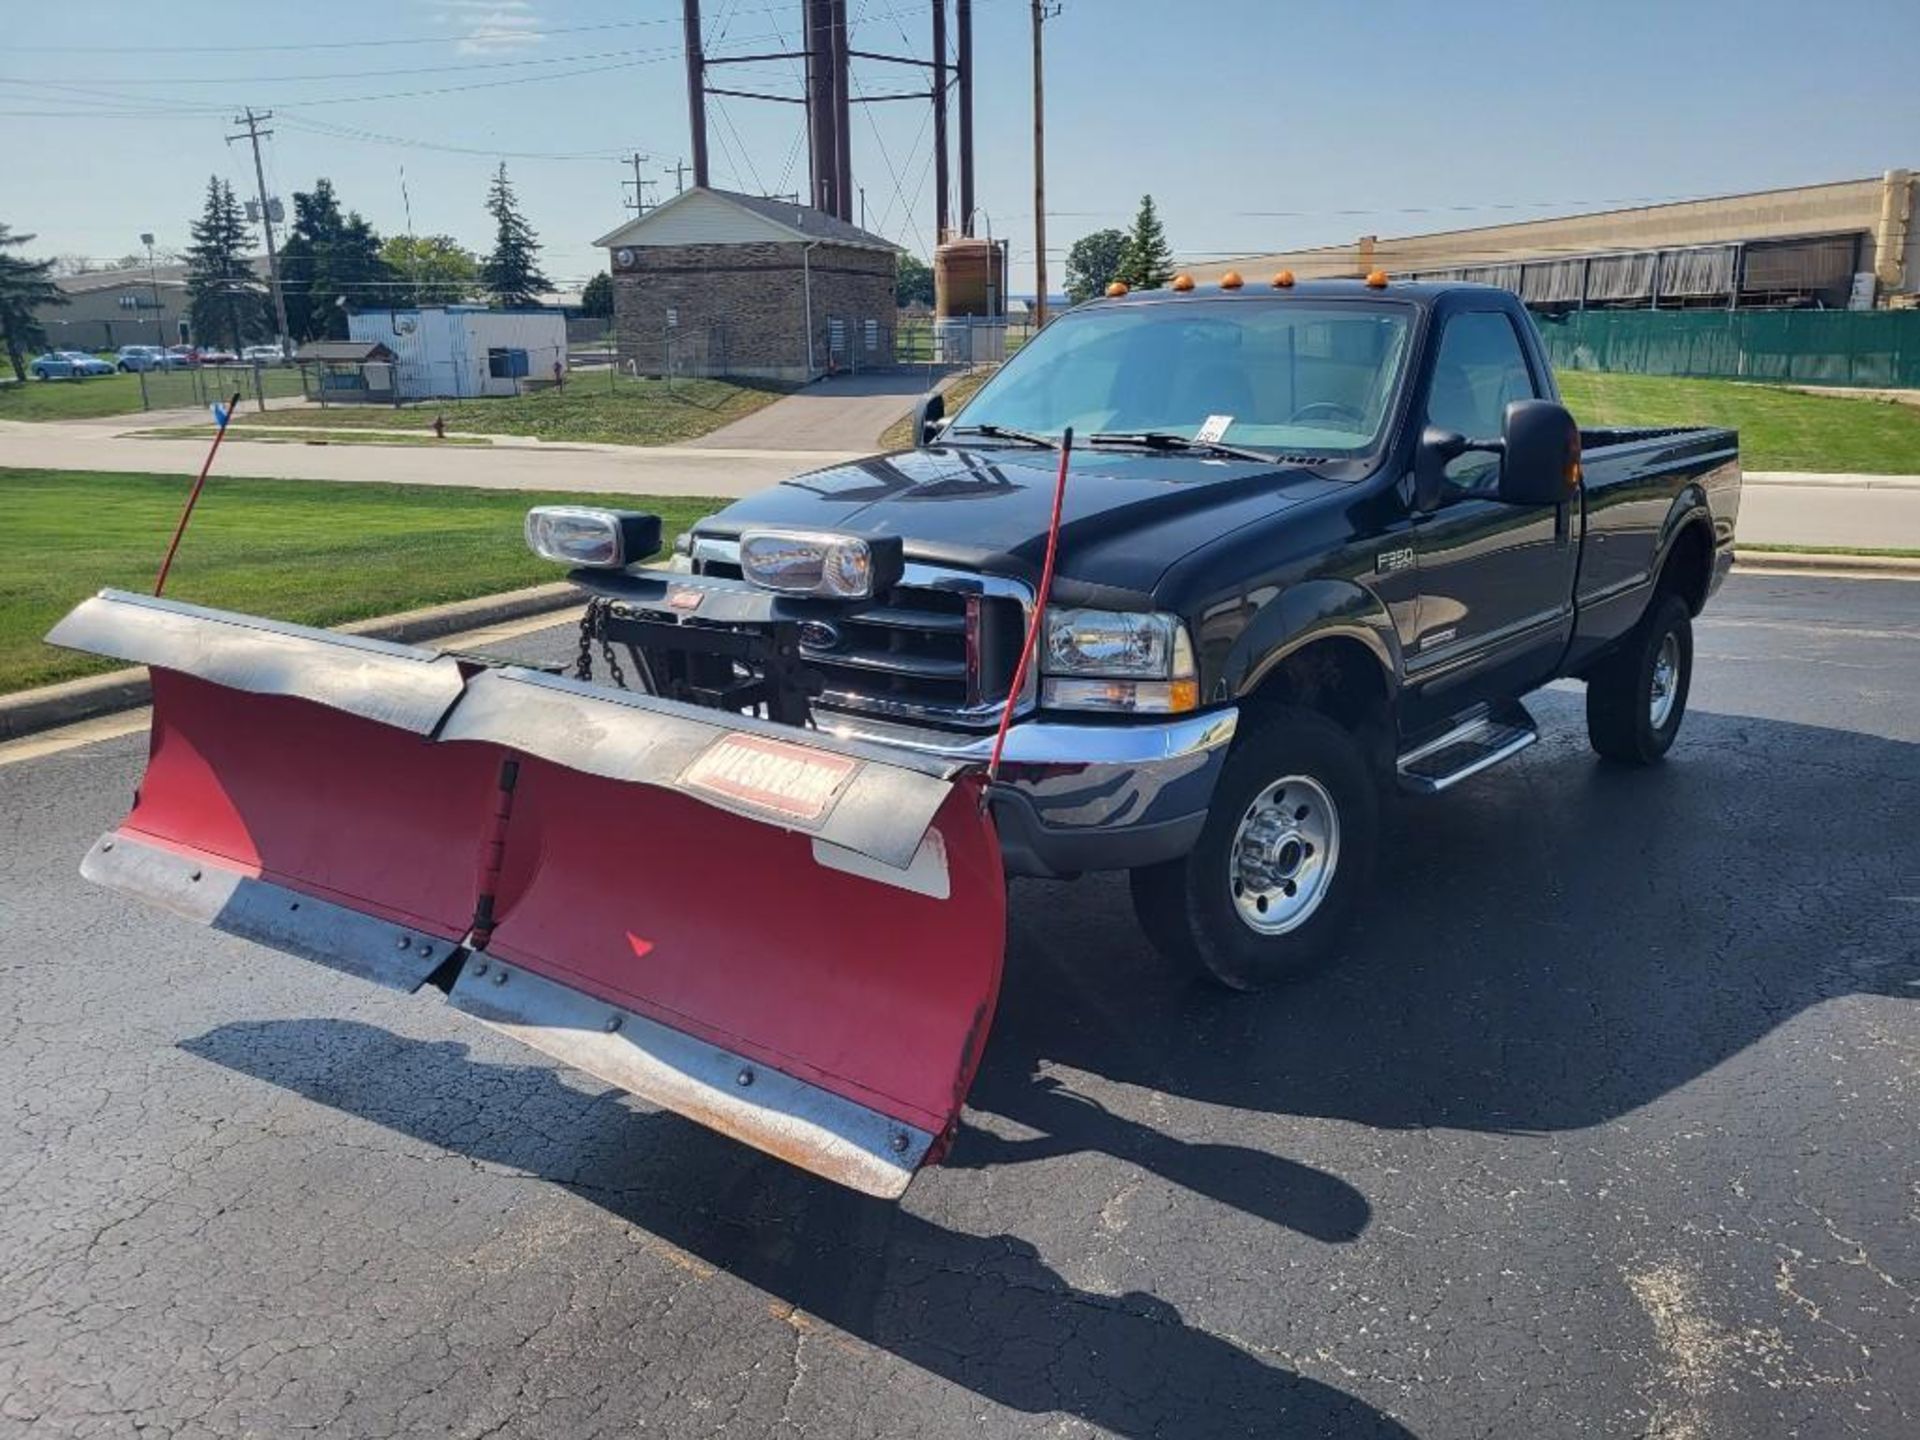 2004 FORD F-350 4X4 DIESEL PLOW TRUCK WITH WESTERN MVP MULTIPOSITION PLOW